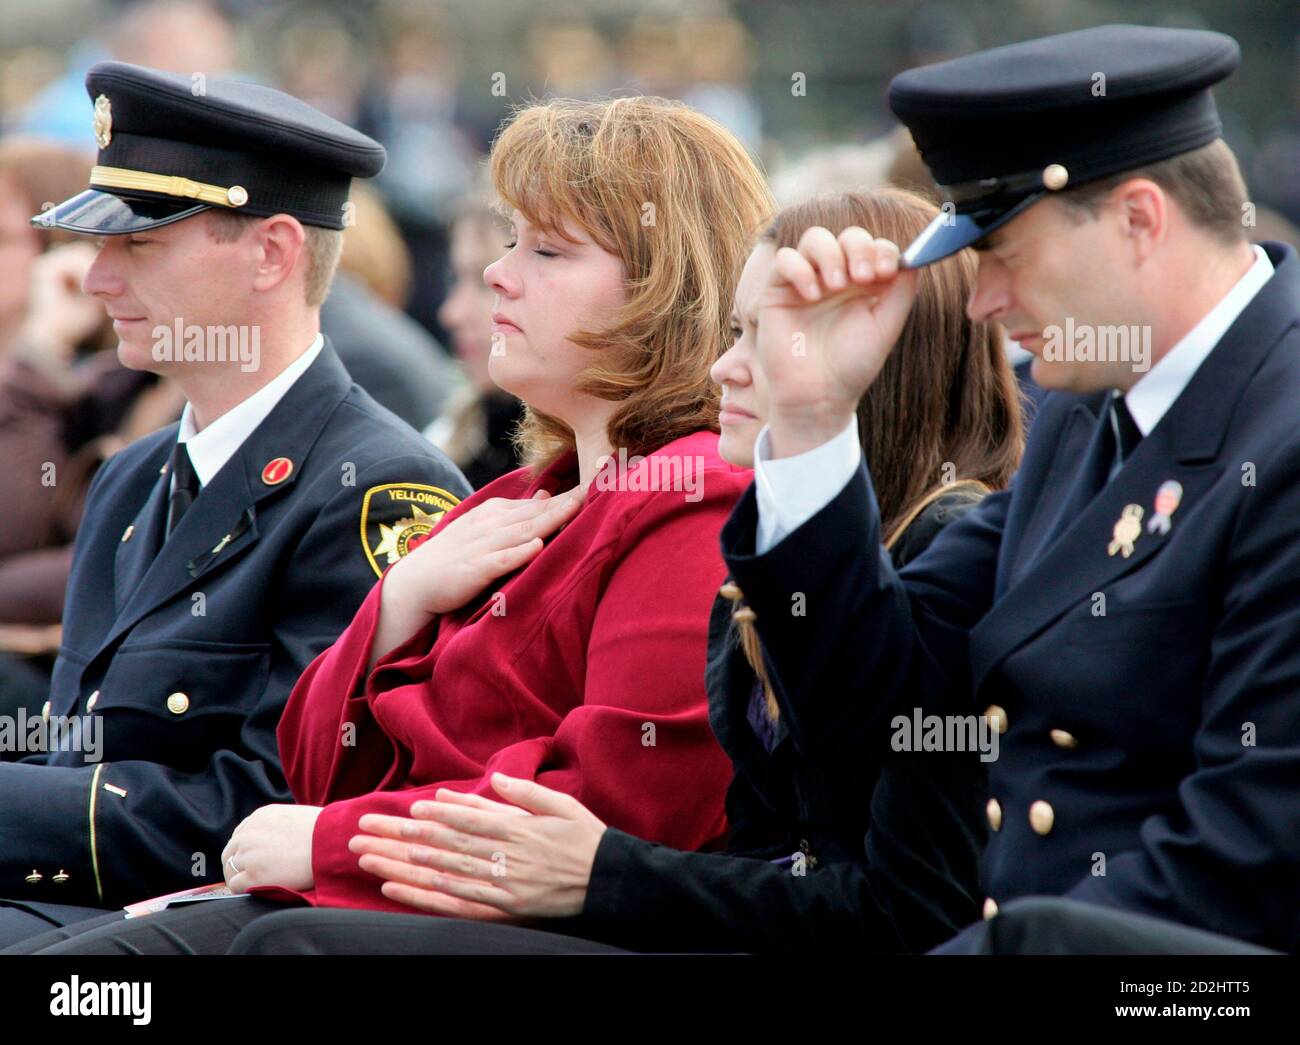 The wife of fallen firefighter Lieutenant Cyril Fyfe, Andrea Loomis (2nd L), reacts during the Canadian Fallen Firefighters memorial service on Parliament Hill in Ottawa, September 10, 2006. Fyfe's daughter, Jolene Fyfe (2nd R), is seated beside her.     REUTERS/Chris Wattie  (CANADA) Stock Photo